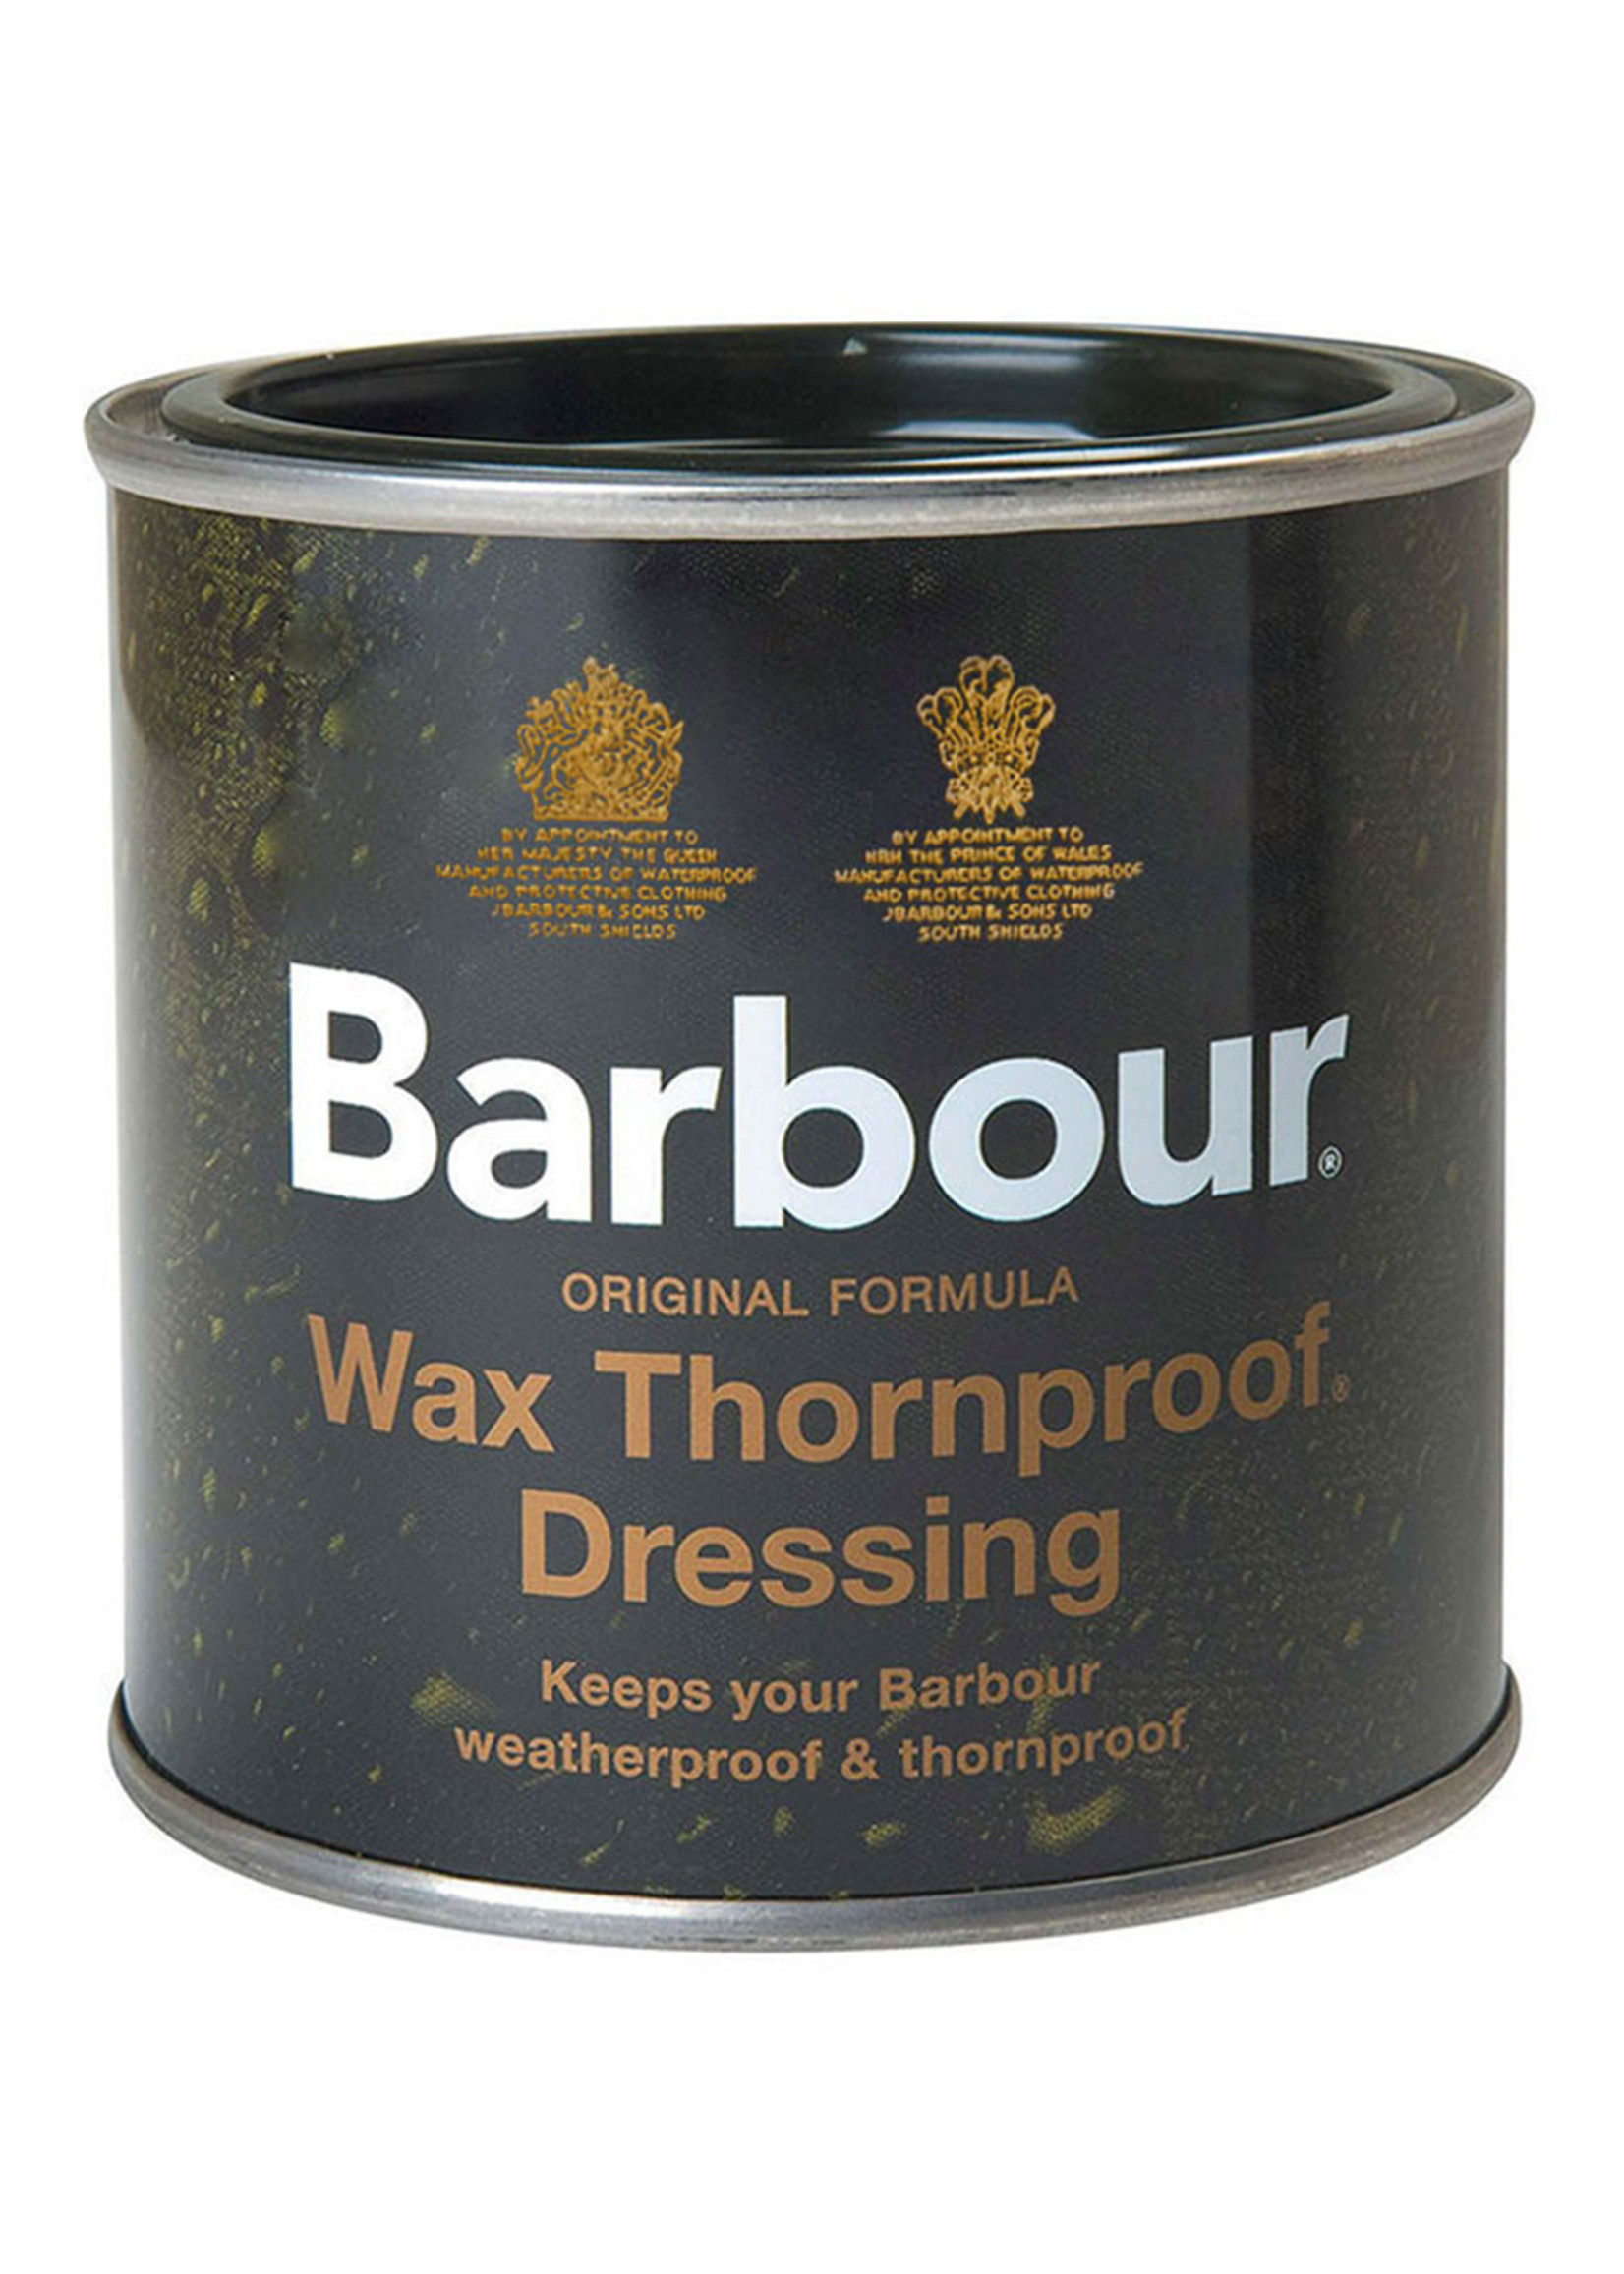 Barbour WAX THORNPROOF DRESSING